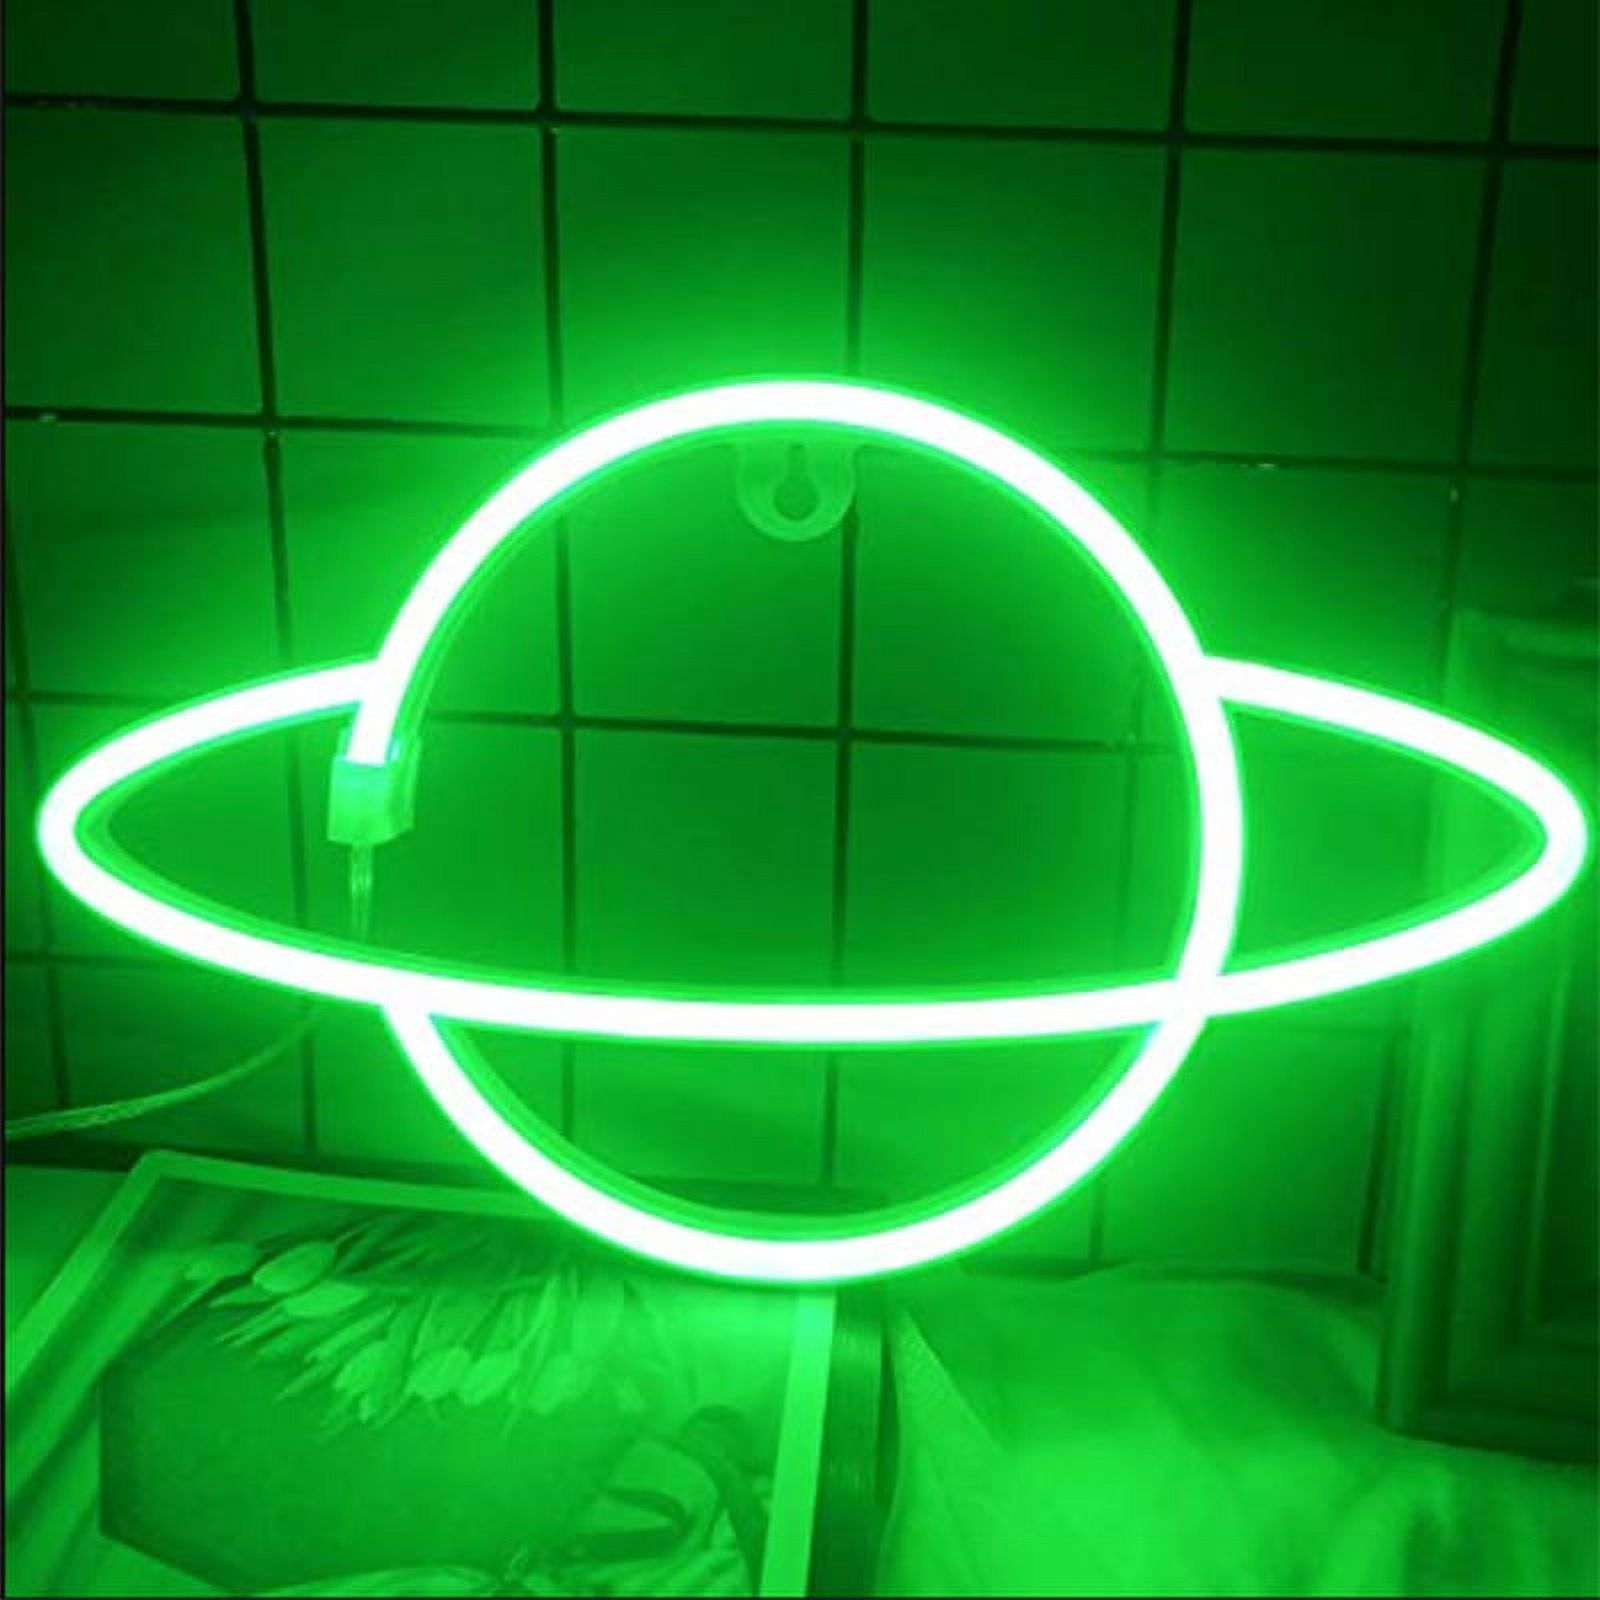 A green neon Saturn sign in a dark room. - Lime green